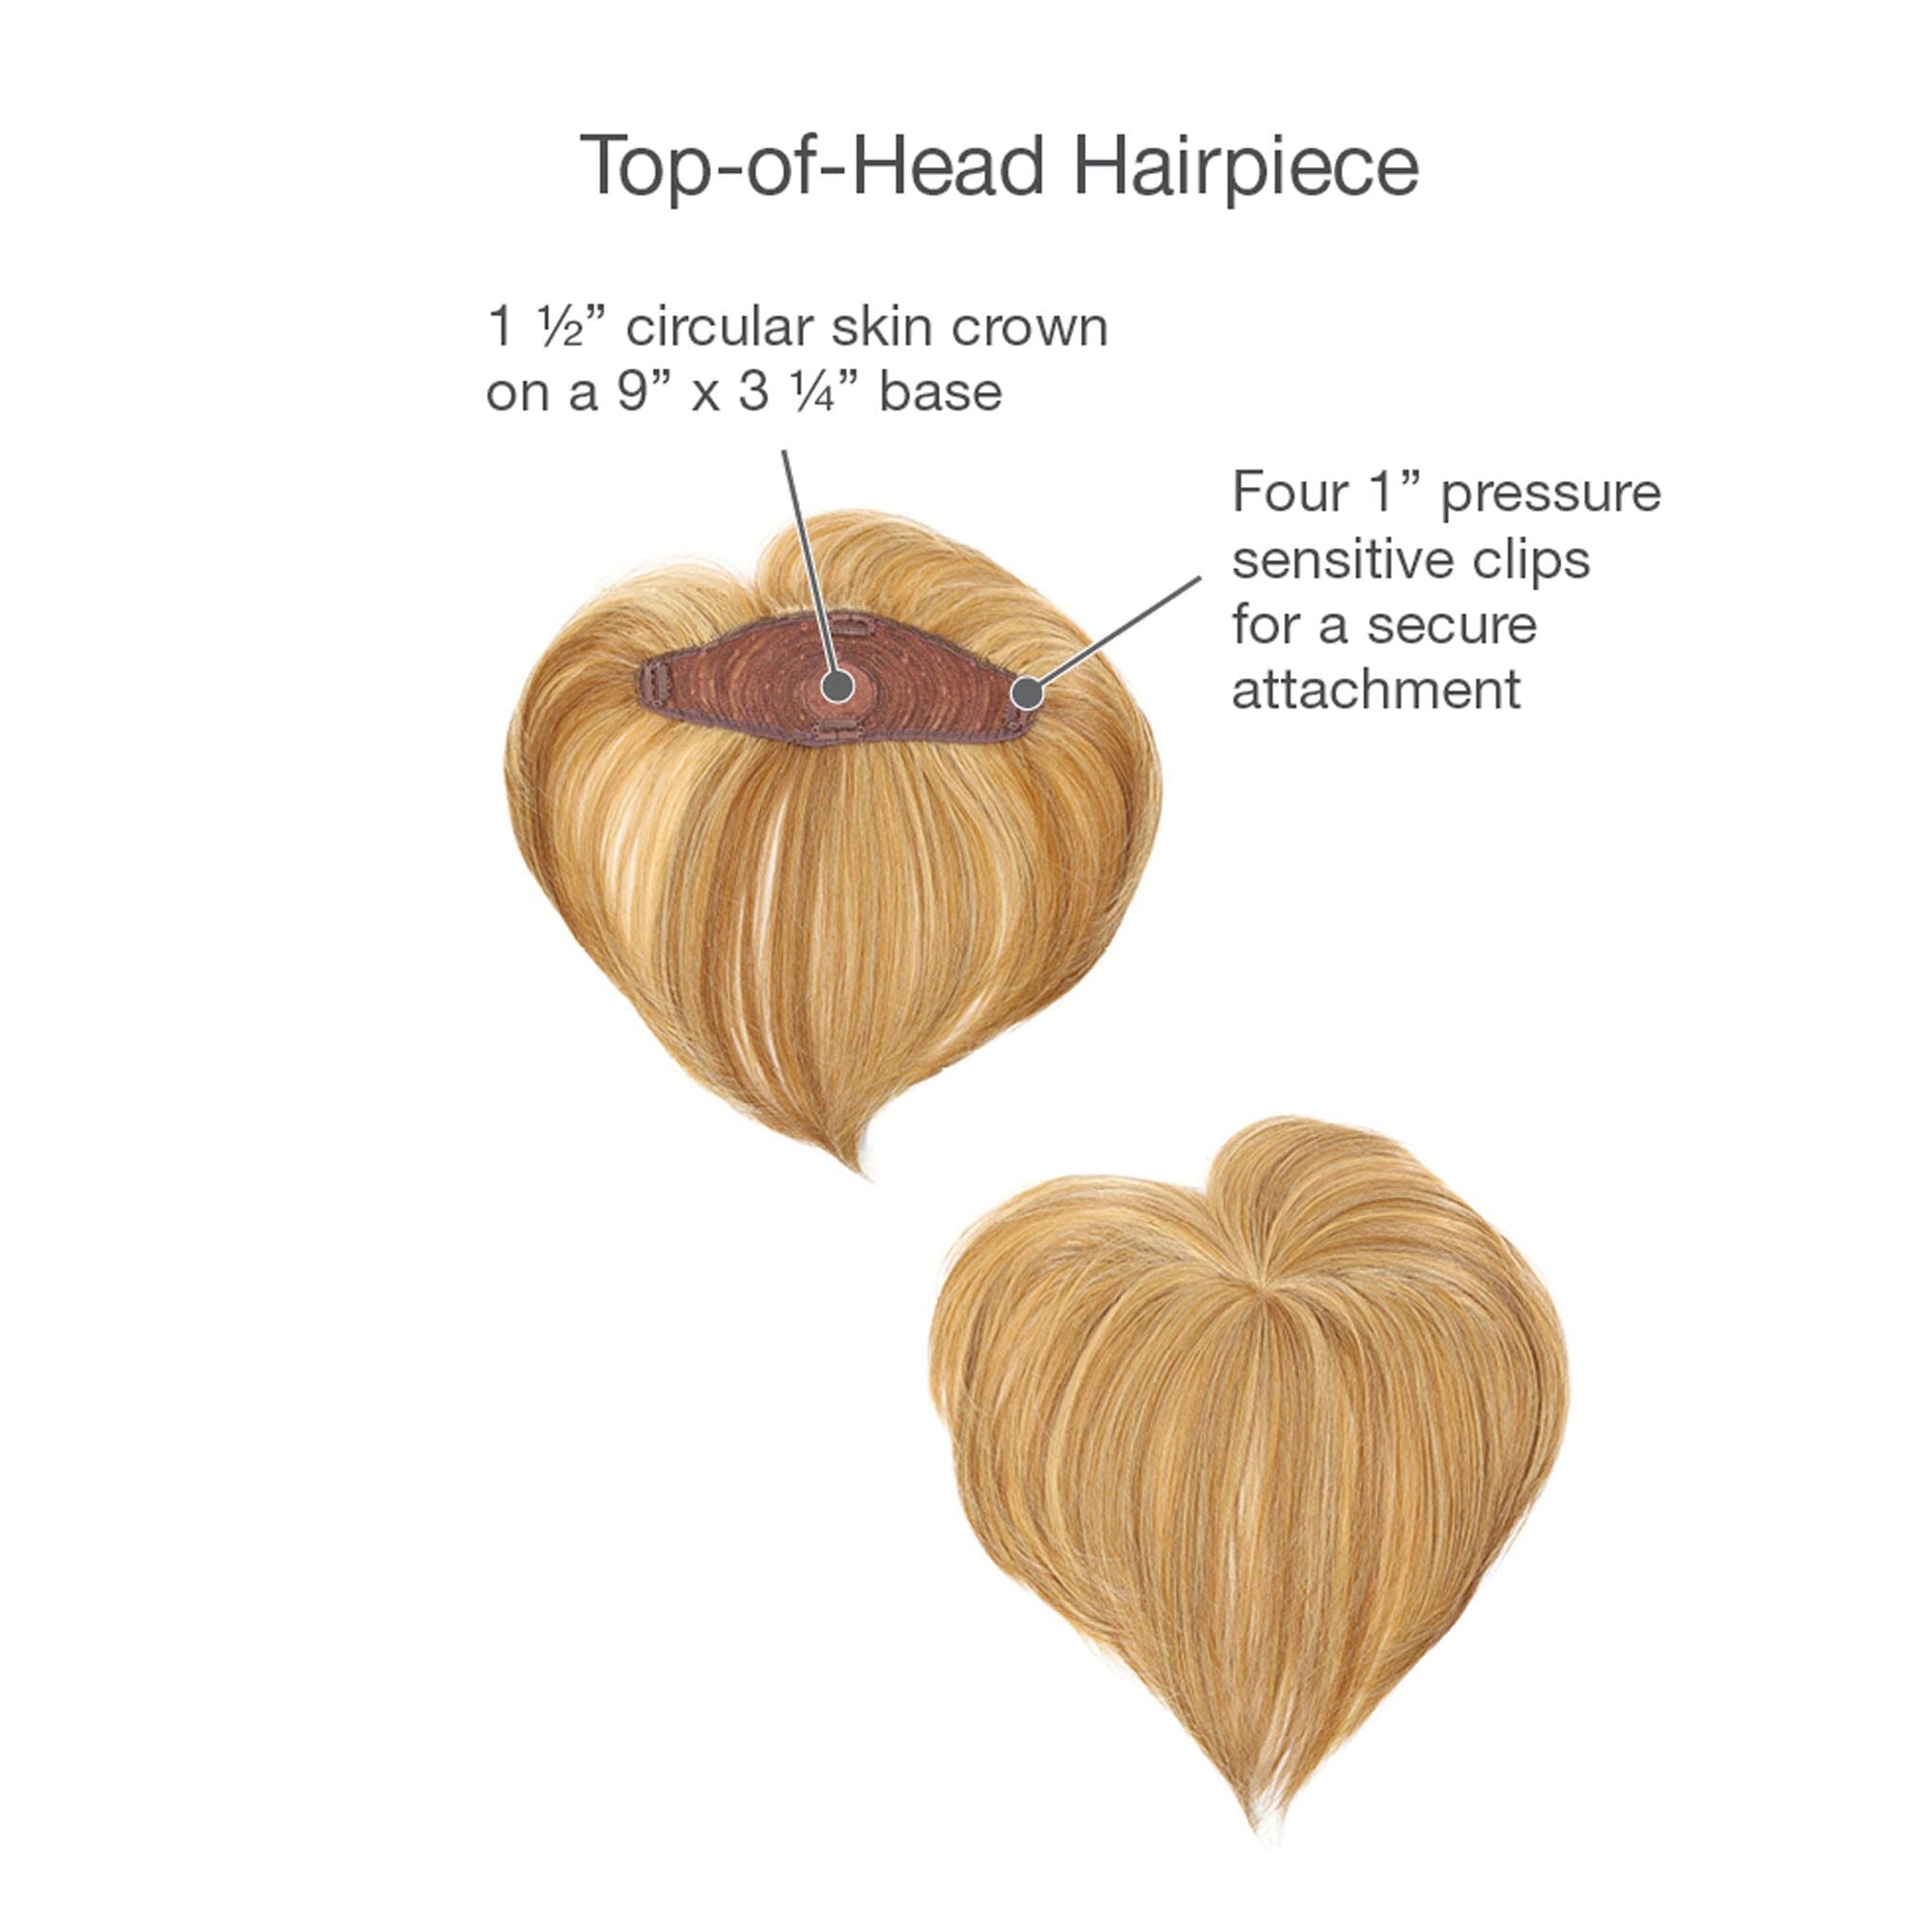 Top-of-Head Hairpiece